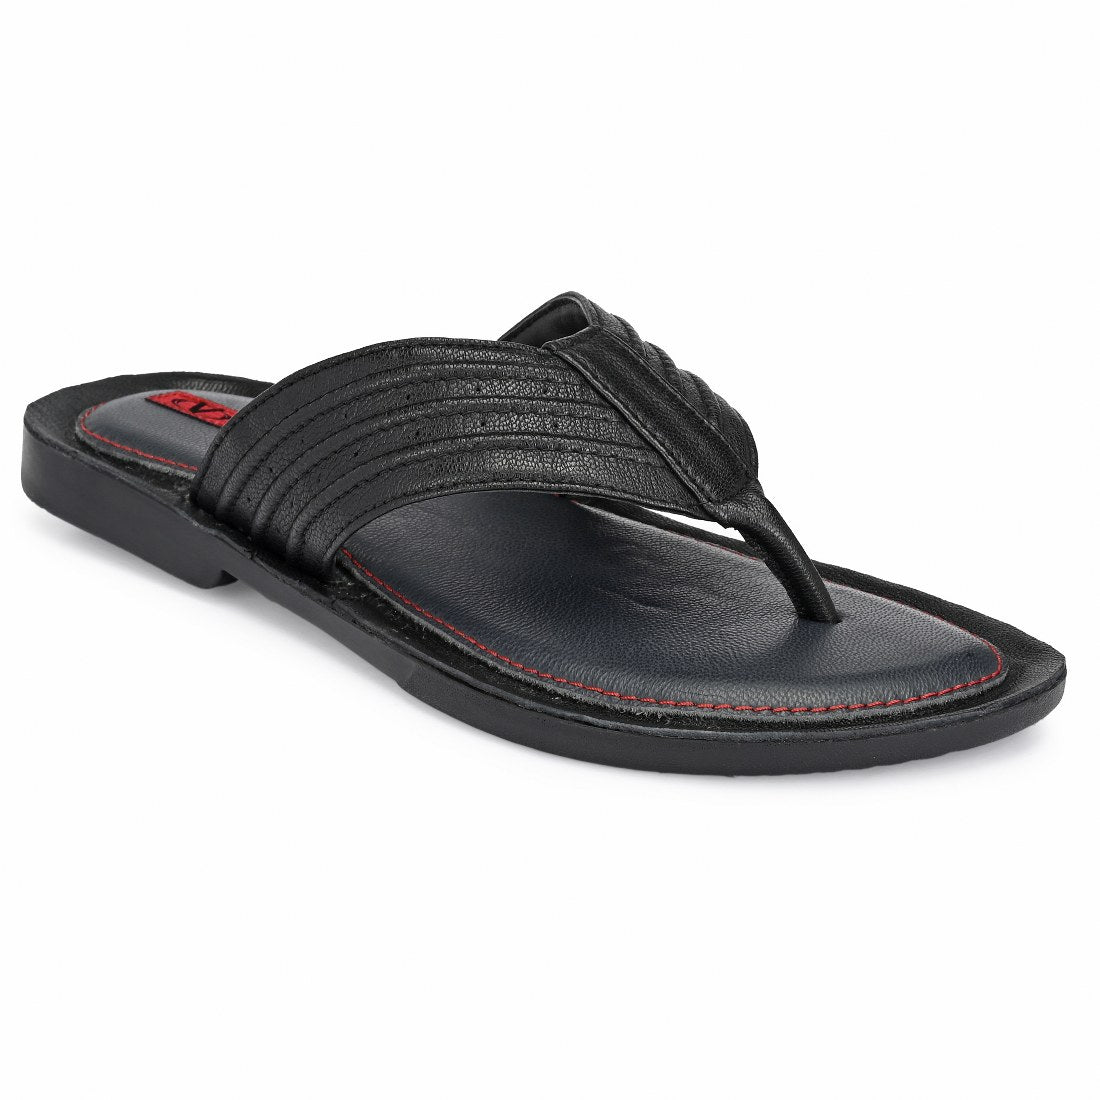 CHILL OUT-20 MEN LEATHER BLACK CASUAL SLIPPER V-STRAP